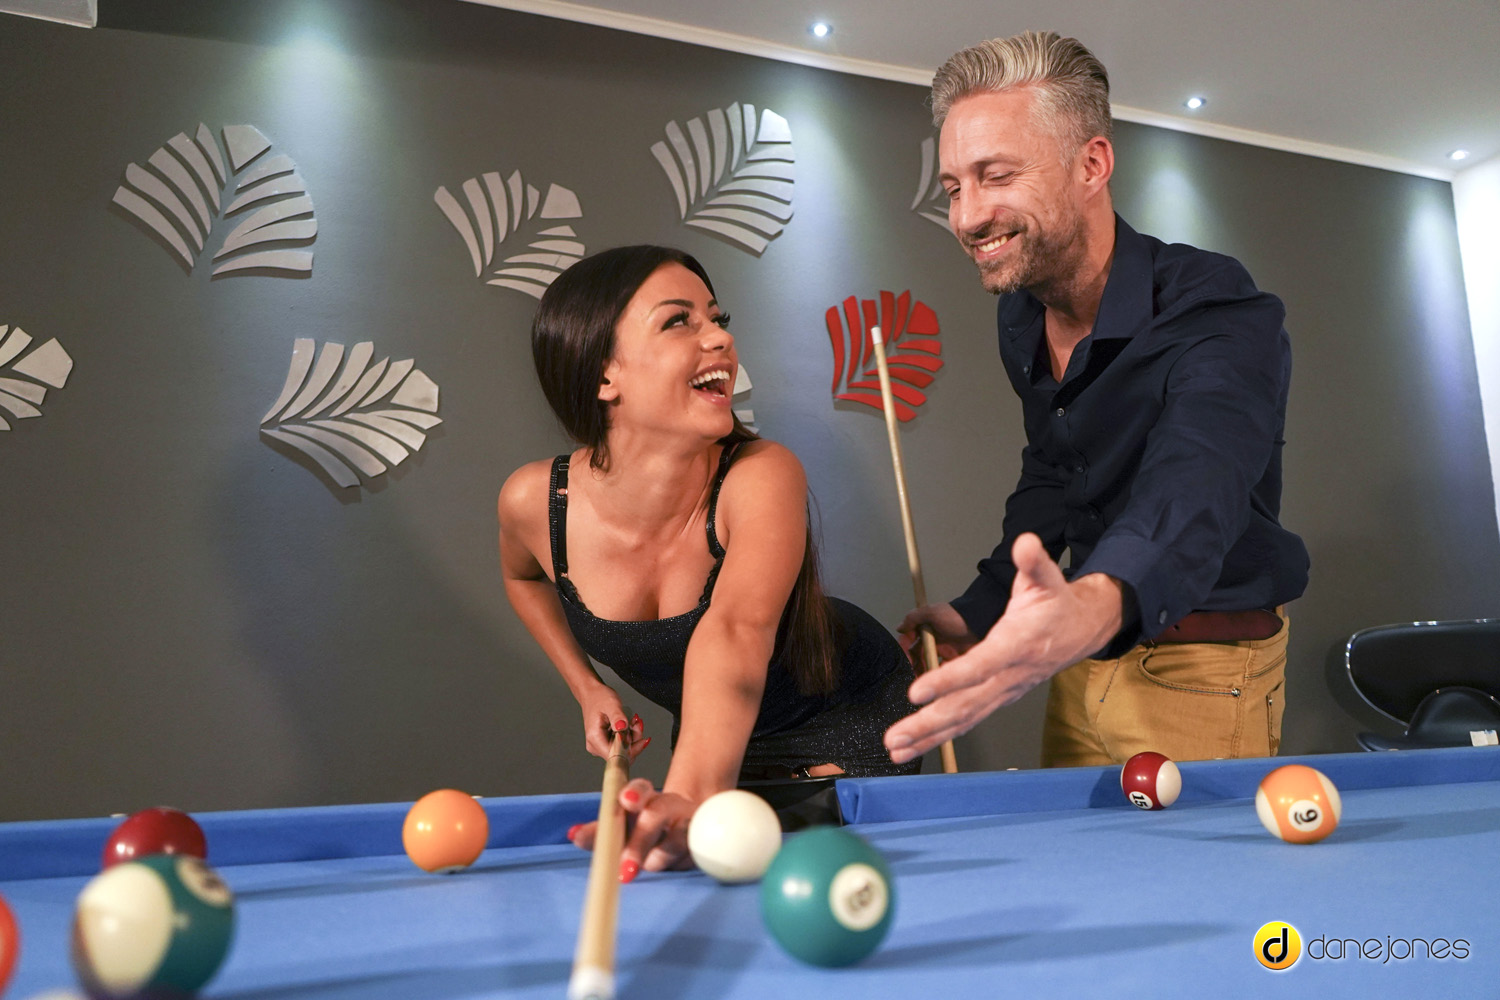 Martina Smeraldi gets her pussy pumped on top of the pool table